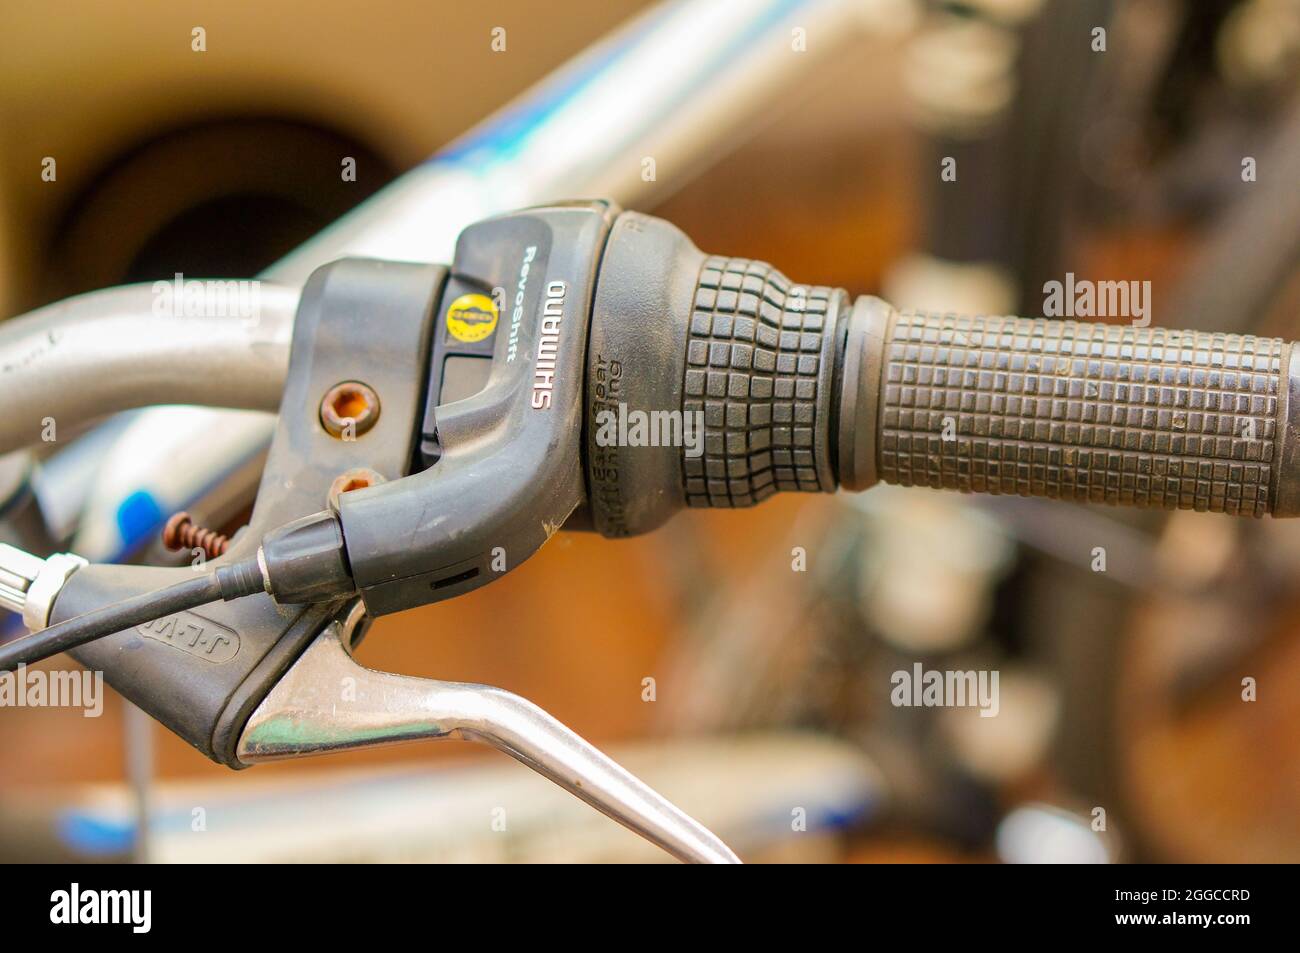 POZNAN, POLAND - Apr 11, 2015: The Shimano gears on a bicycle handle Stock Photo